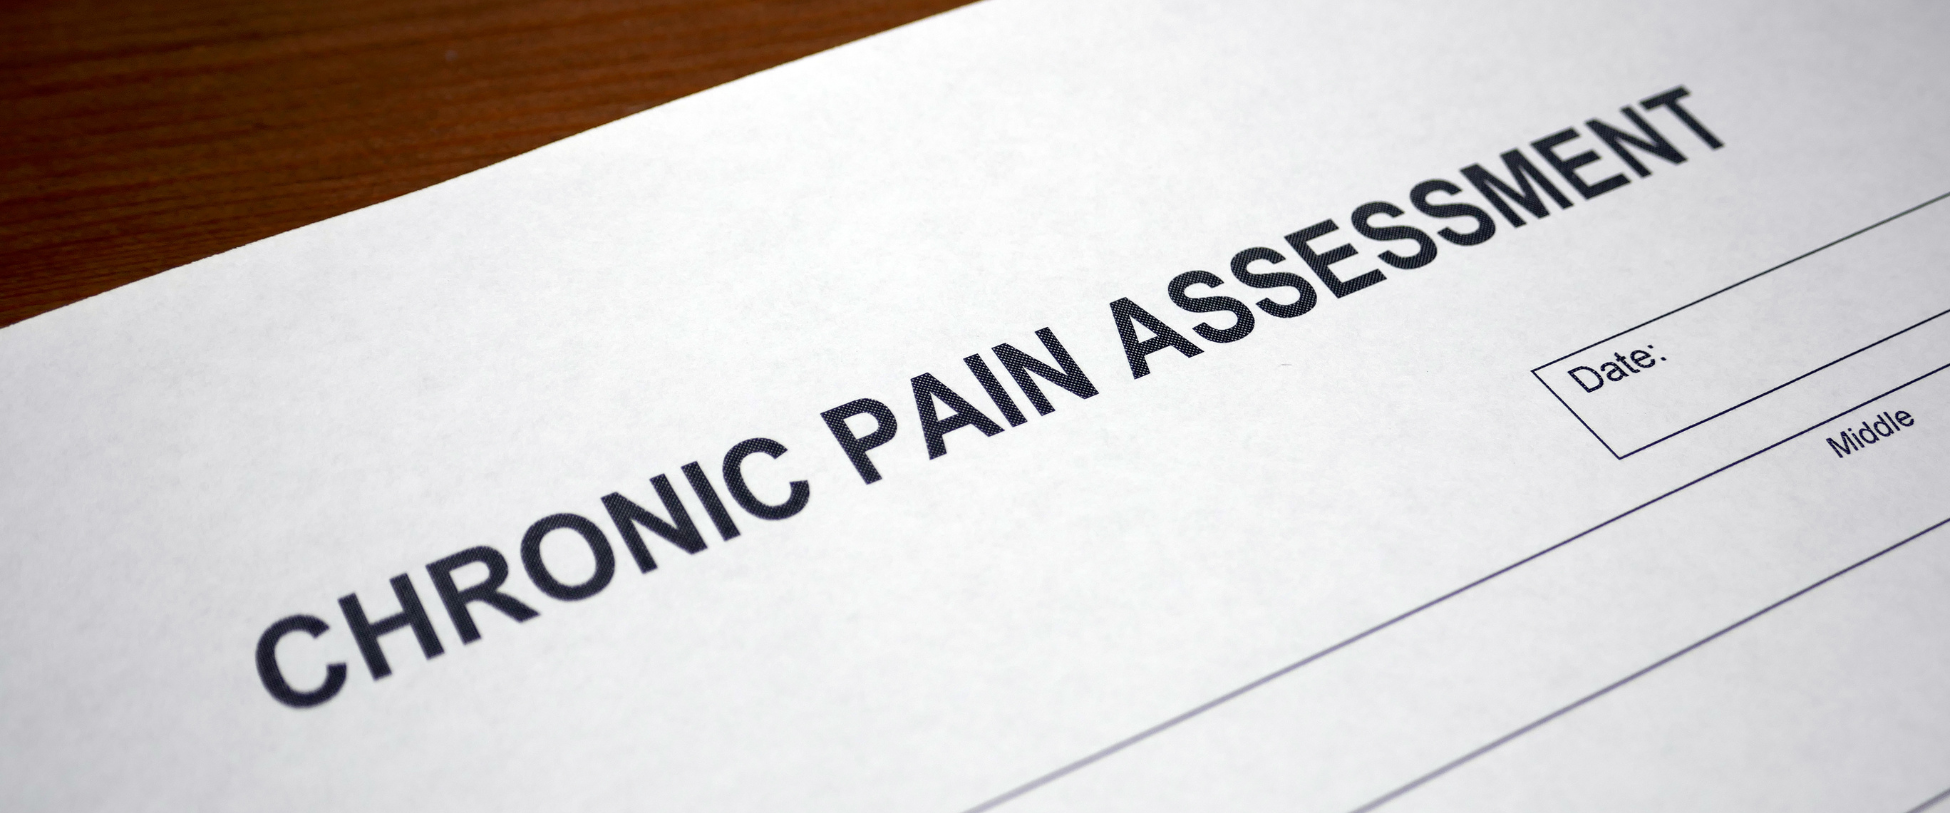 A chronic pain assessment form